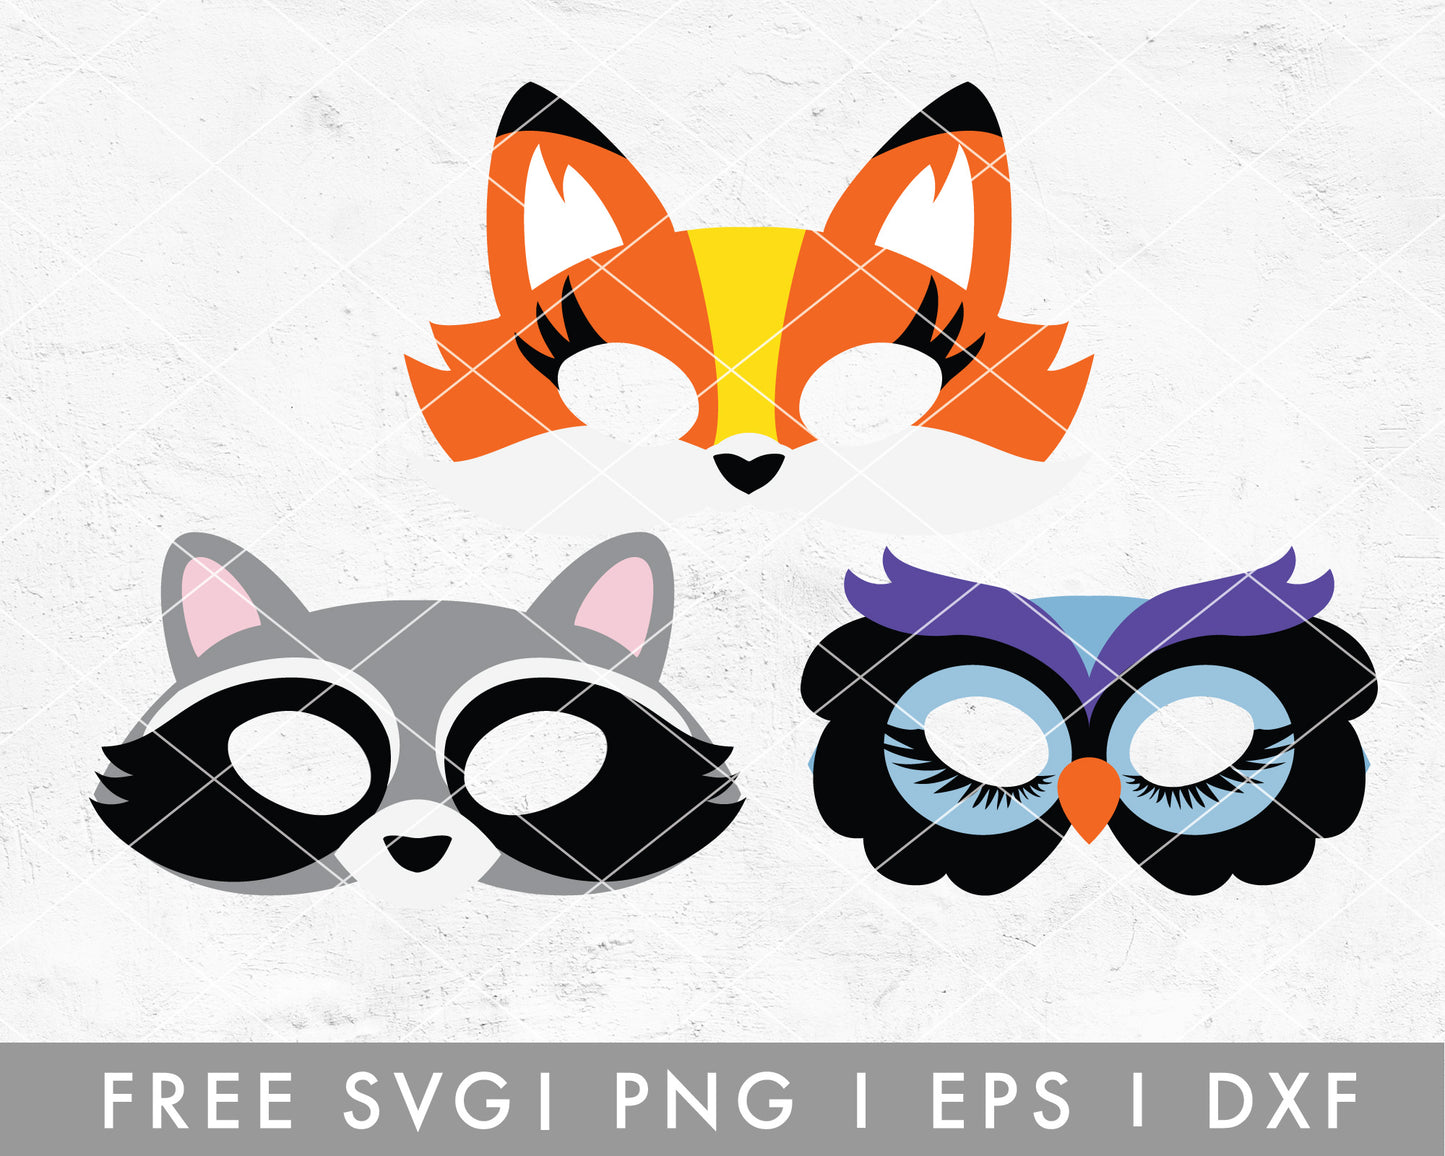 FREE FREE Forest Animal SVG | Face Mask SVG Cut File for Cricut, Cameo Silhouette | Free SVG Cut File